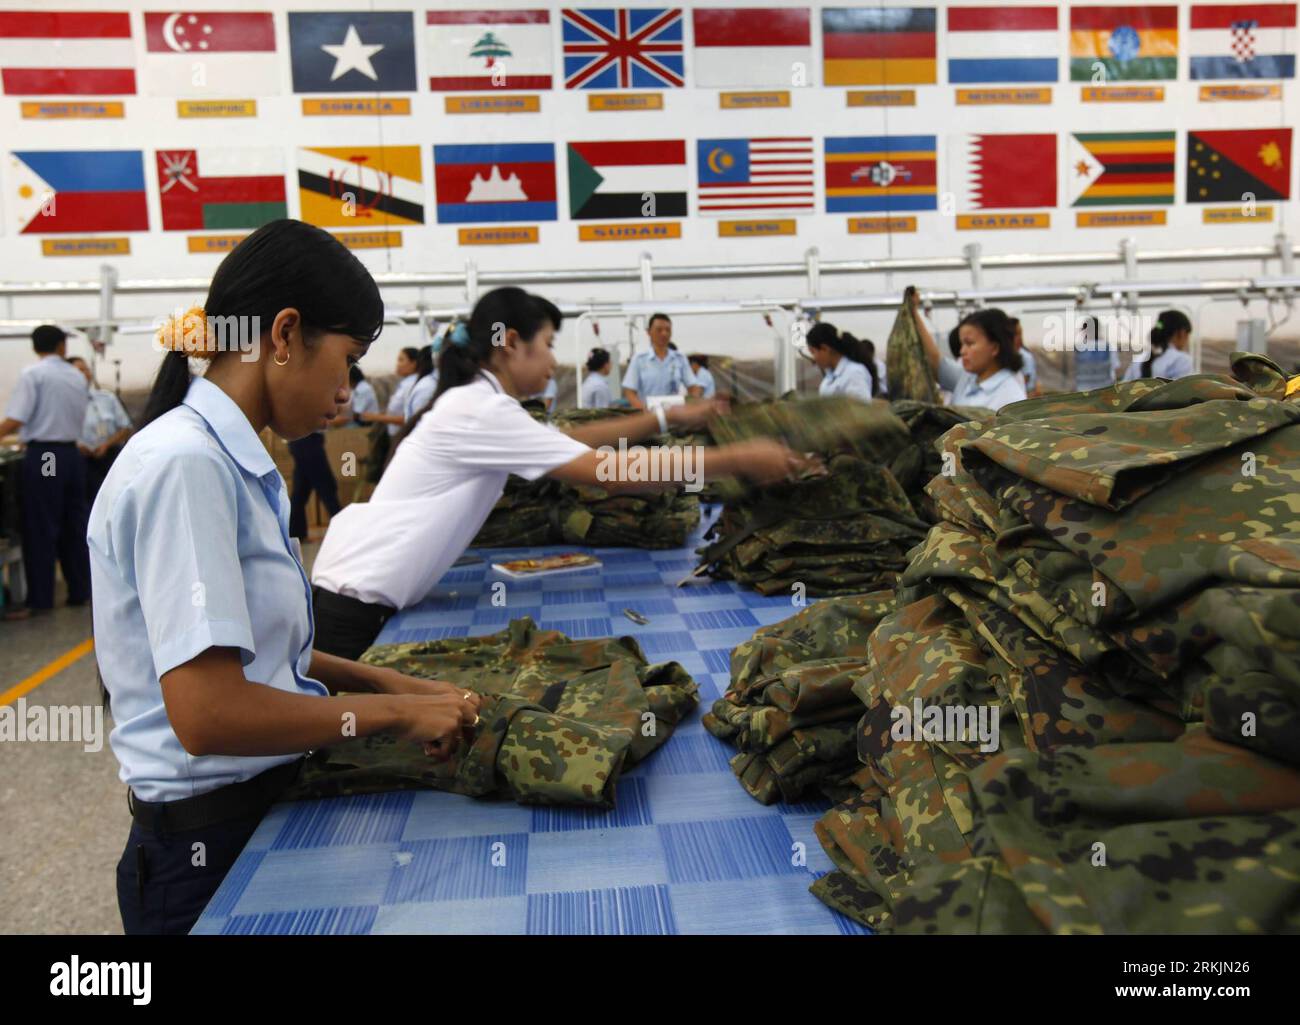 Bildnummer: 56146654  Datum: 20.09.2011  Copyright: imago/Xinhua (111005) -- JAKARTA, Oct. 5, 2011 (Xinhua) -- Workers check army uniforms at Sritex textile factory in this file photo taken in Solo, central Java province, on Sept. 20, 2011. Exports of textiles and textile products (TPT) of Indonesia increased 20 percent, or 1.8 billion US dollars, in the first half of 2011, according to the Indonesian Textile Association (API). (Xinhua/Dadang Tri) (zf) INDONESIA-ECONOMY-TEXTILES PUBLICATIONxNOTxINxCHN Wirtschaft Textilindustrie Produktion Uniform Militär Gesellschaft Arbeitswelten xjh x0x 2011 Stock Photo